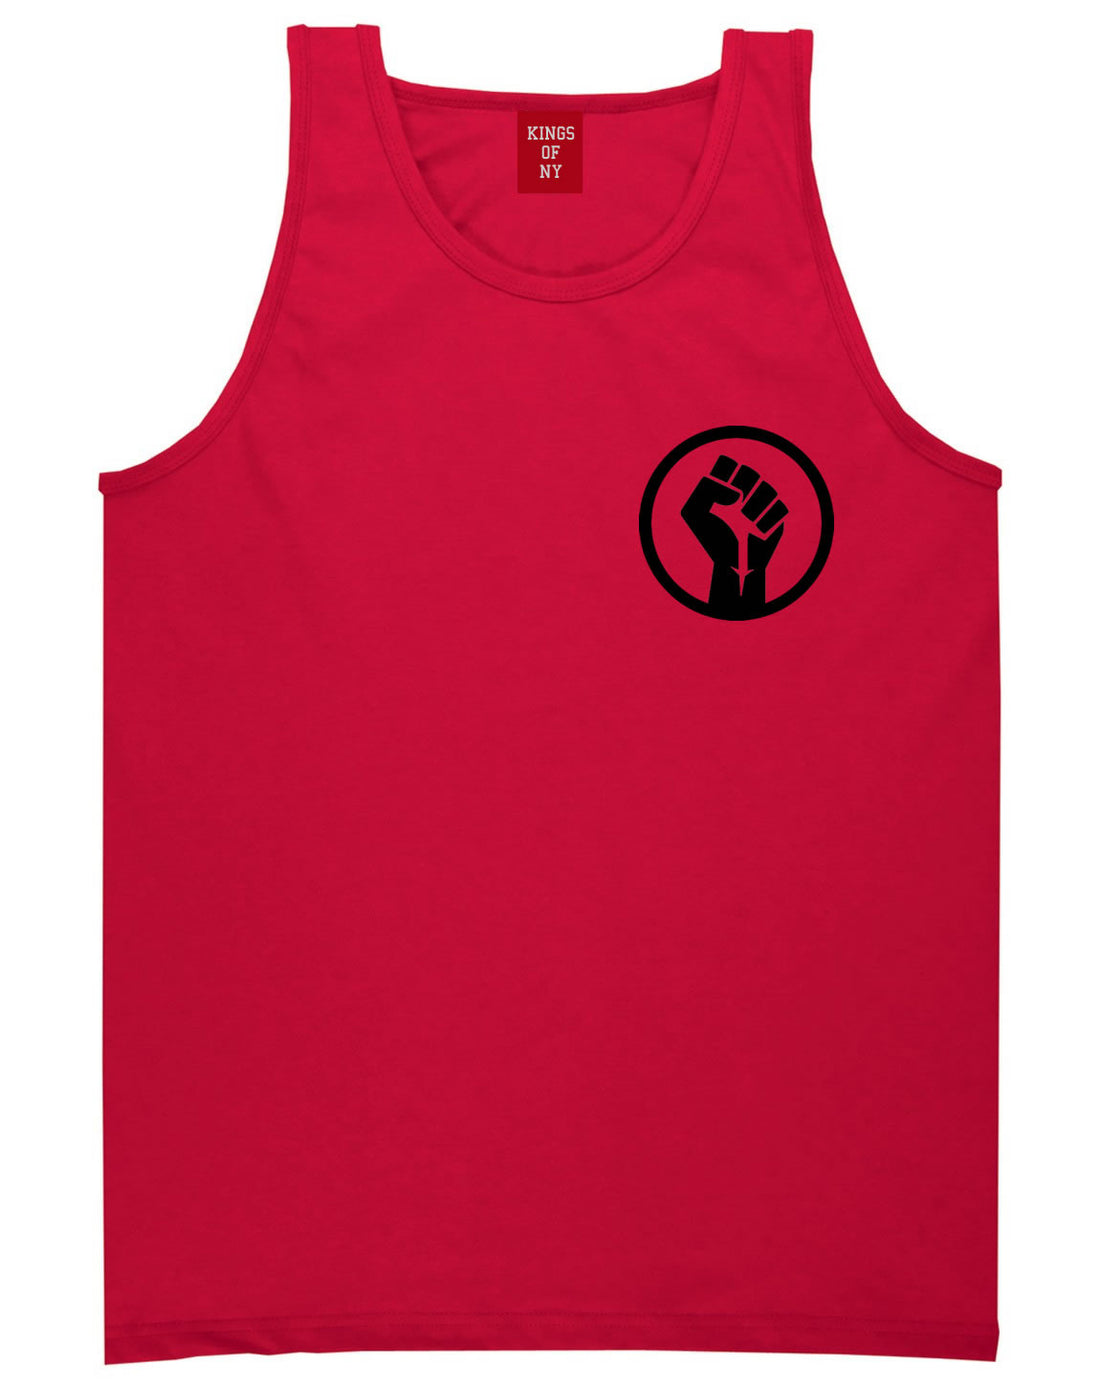 Black Power Fist Tank Top by Kings Of NY